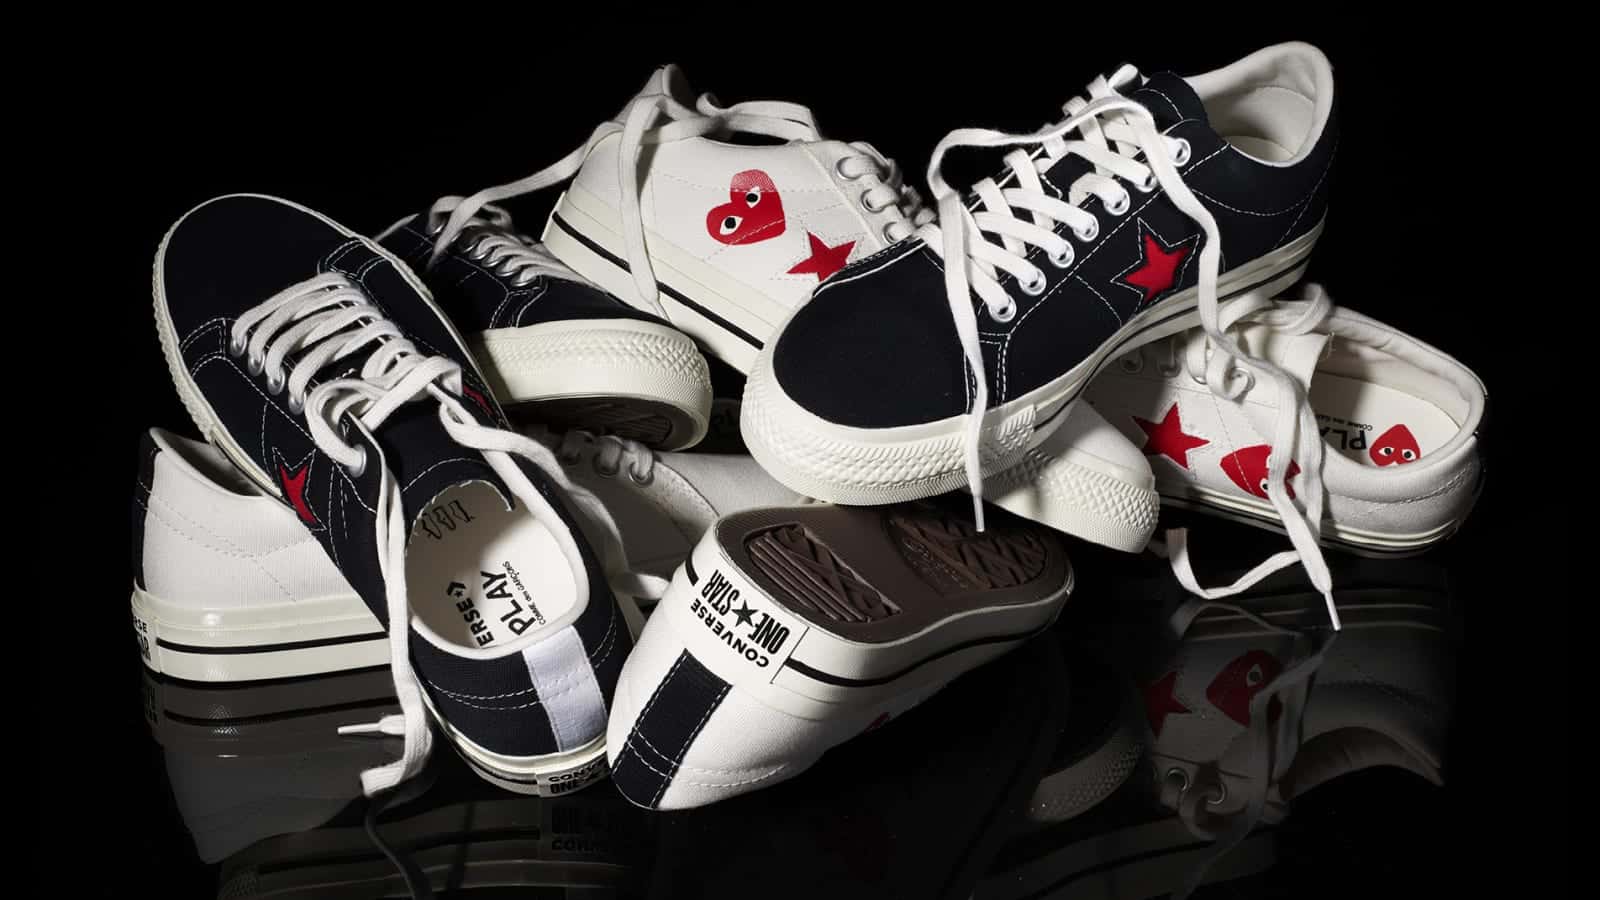 strejke Sædvanlig Opdage Converse and Comme des Garçons PLAY Take a Different Approach with the